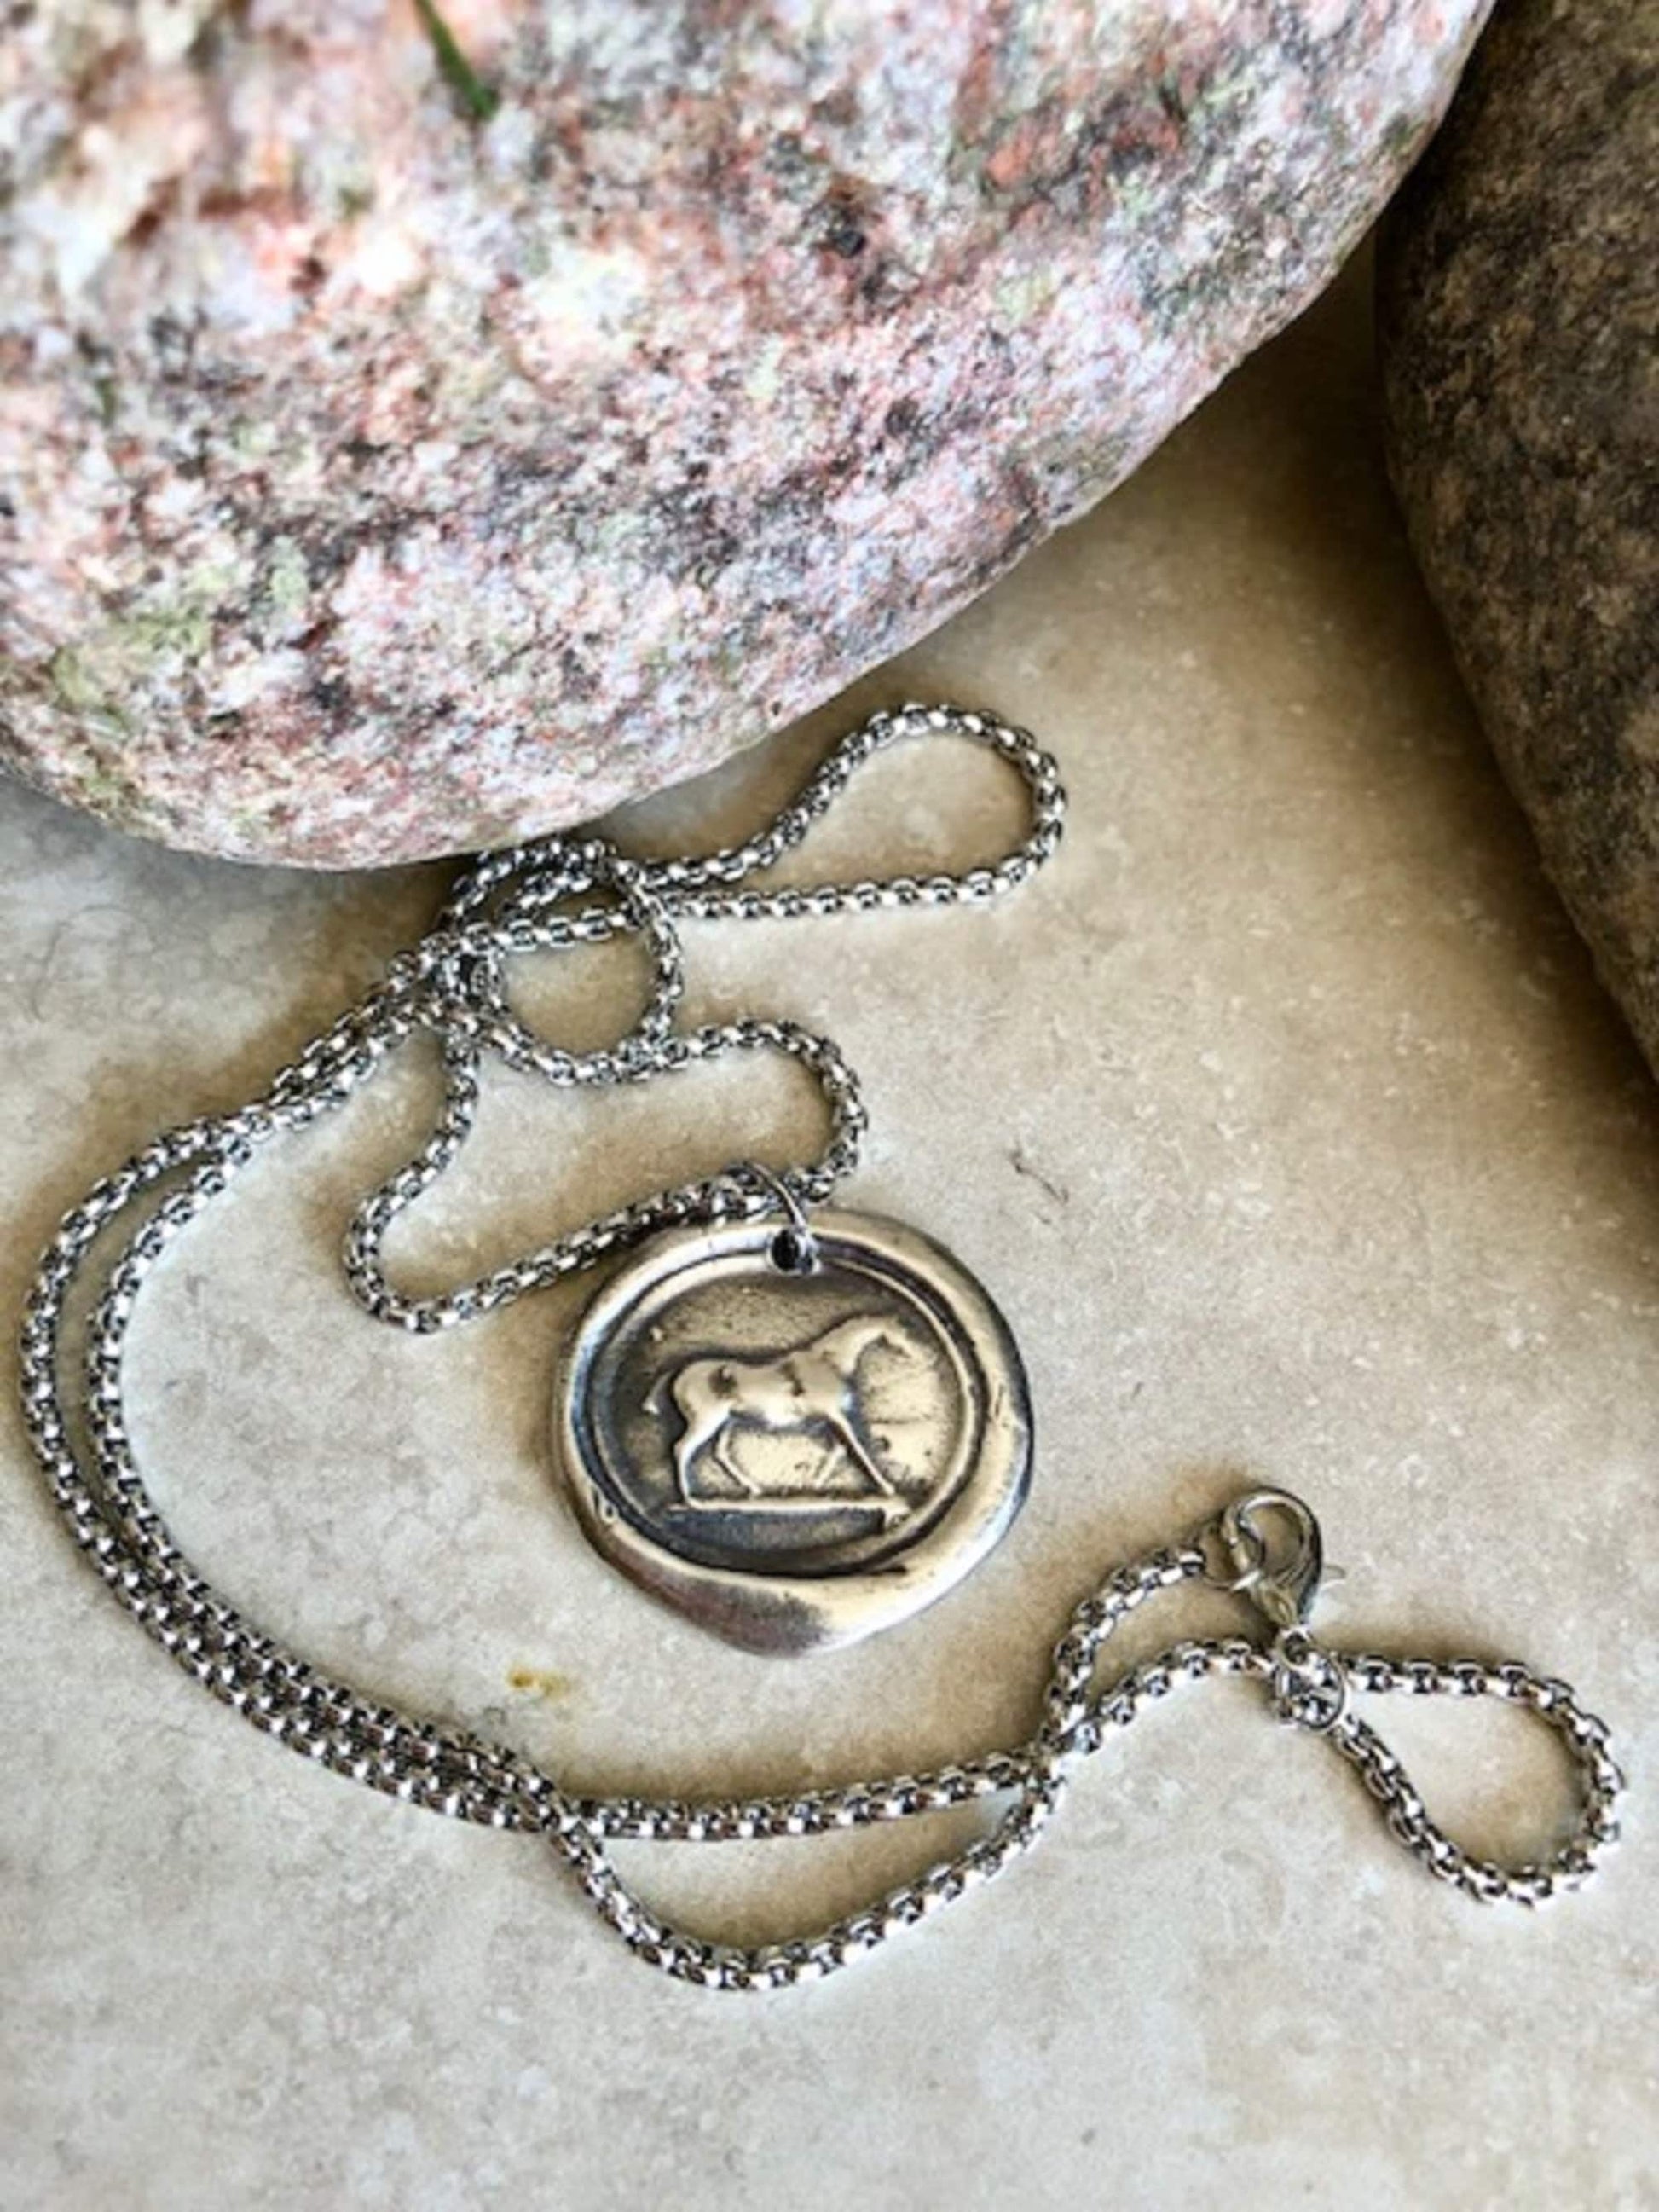 Blest Horse Silver Pendant Necklace - Protection and Luck - Jewelry From an Antique Silver Wax Seal - Jewelry From Charm Fascinations 110